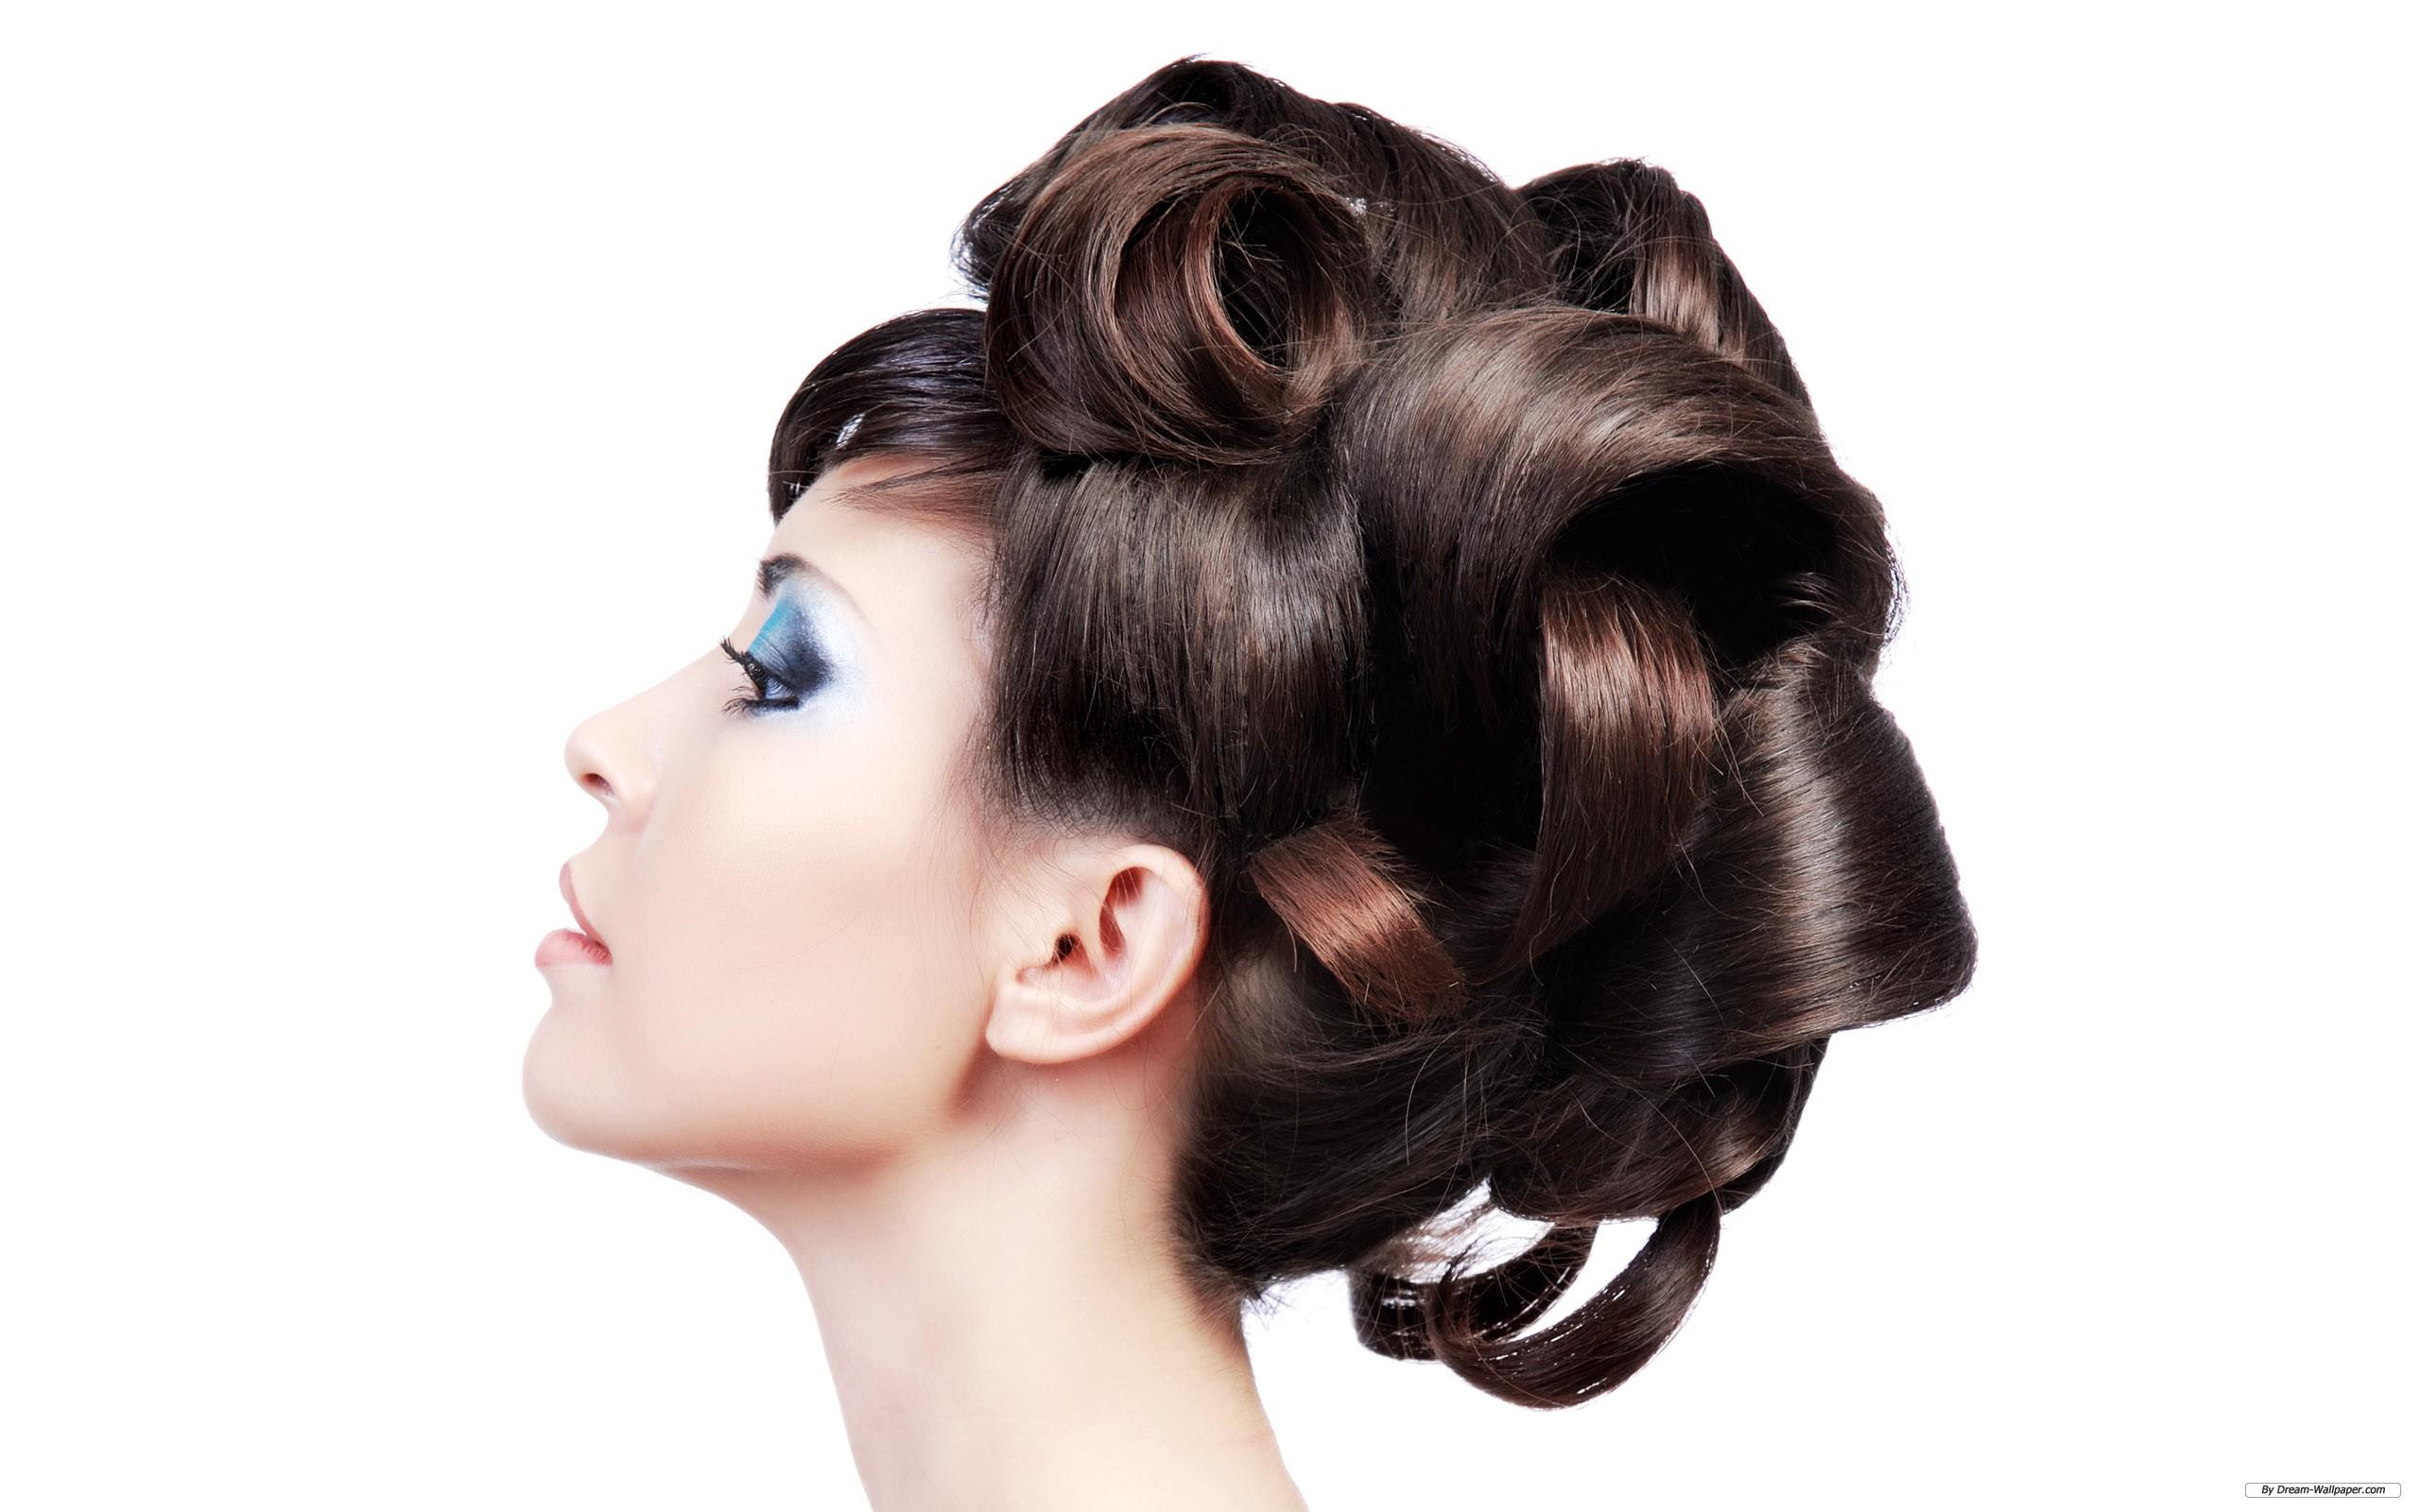 Free Wallpaper Photography wallpaper Hairstyle 1